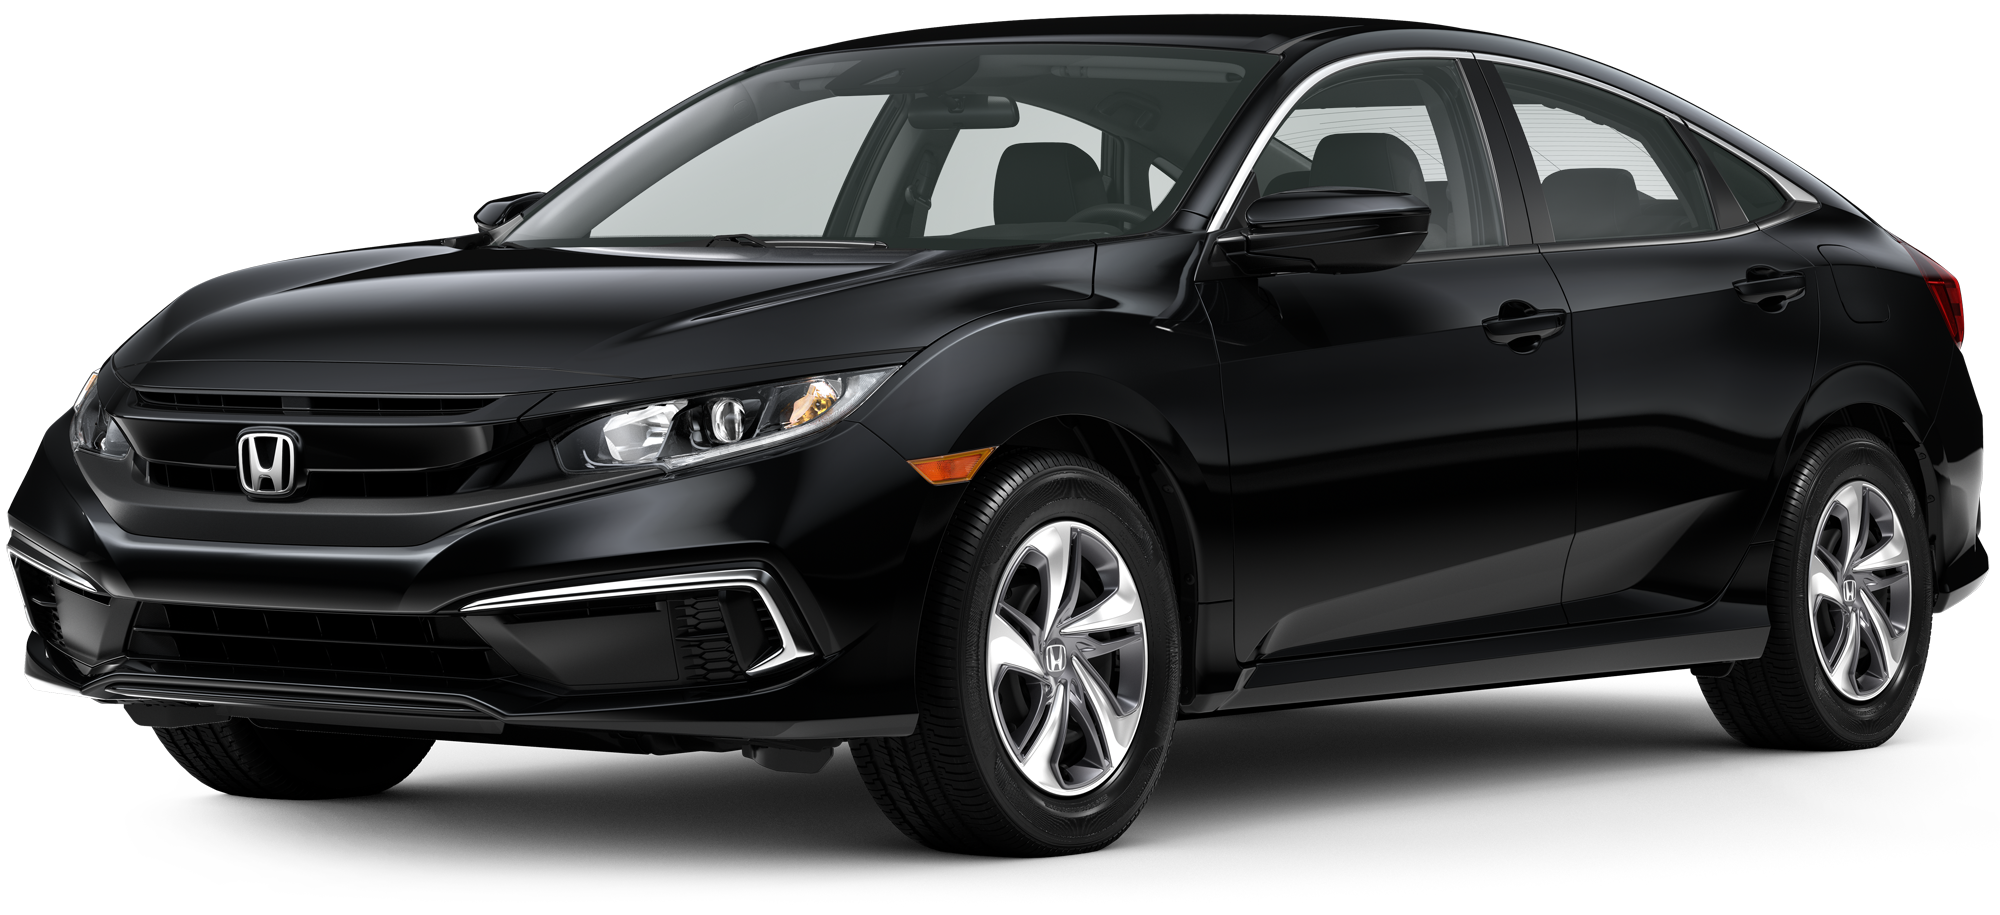 2021-honda-civic-incentives-specials-offers-in-appleton-wi